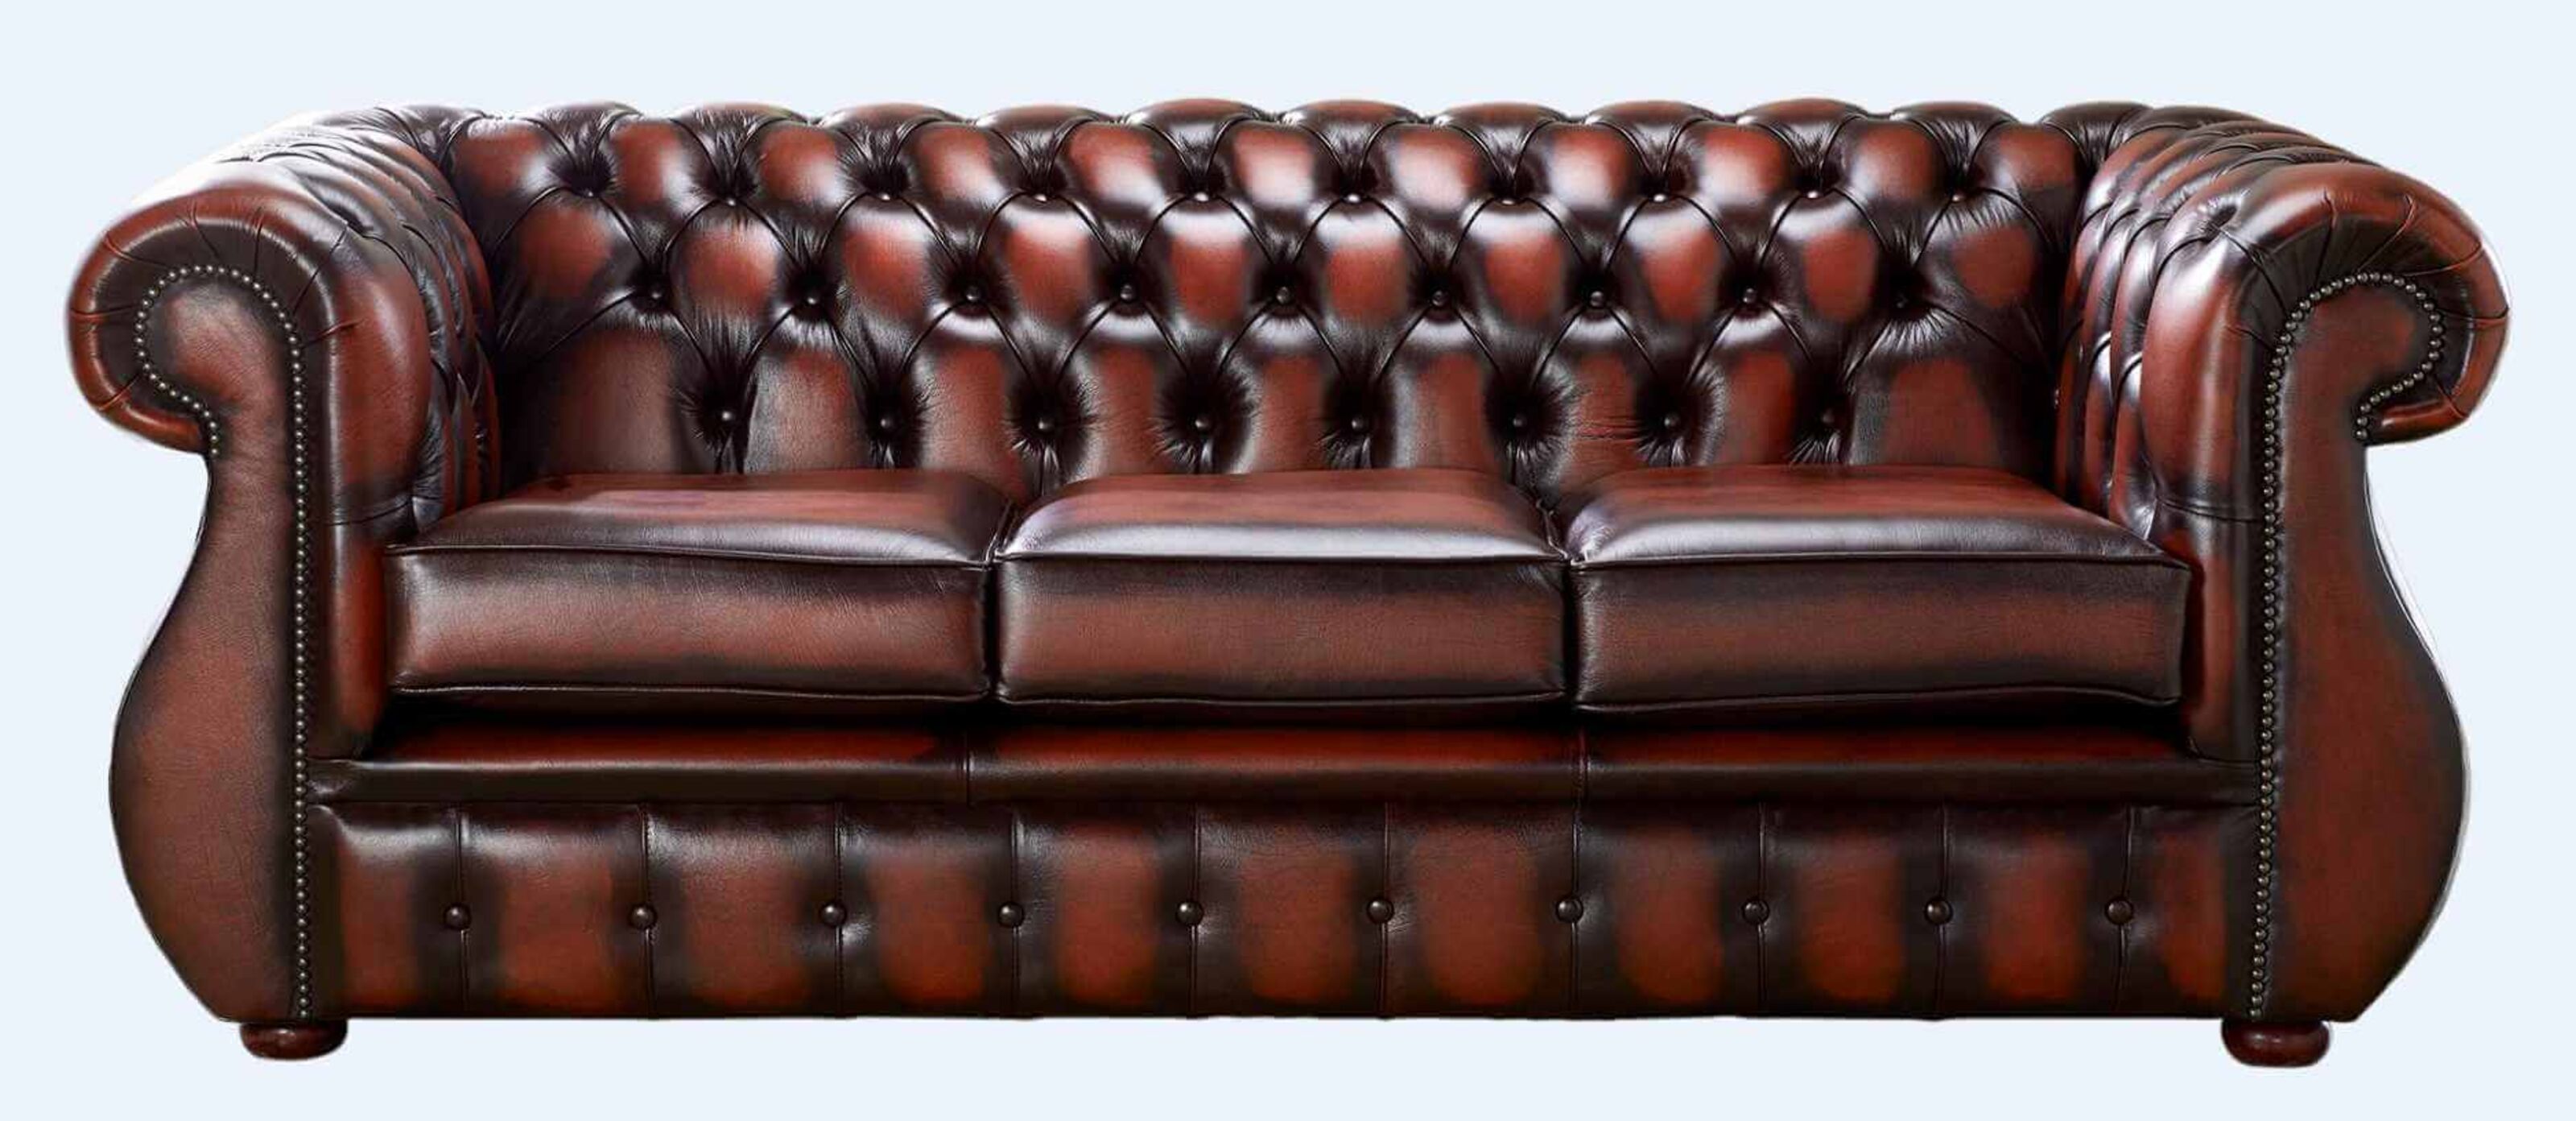 Elevate Your Bar with Elegant Leather Sofas: Here's How  %Post Title